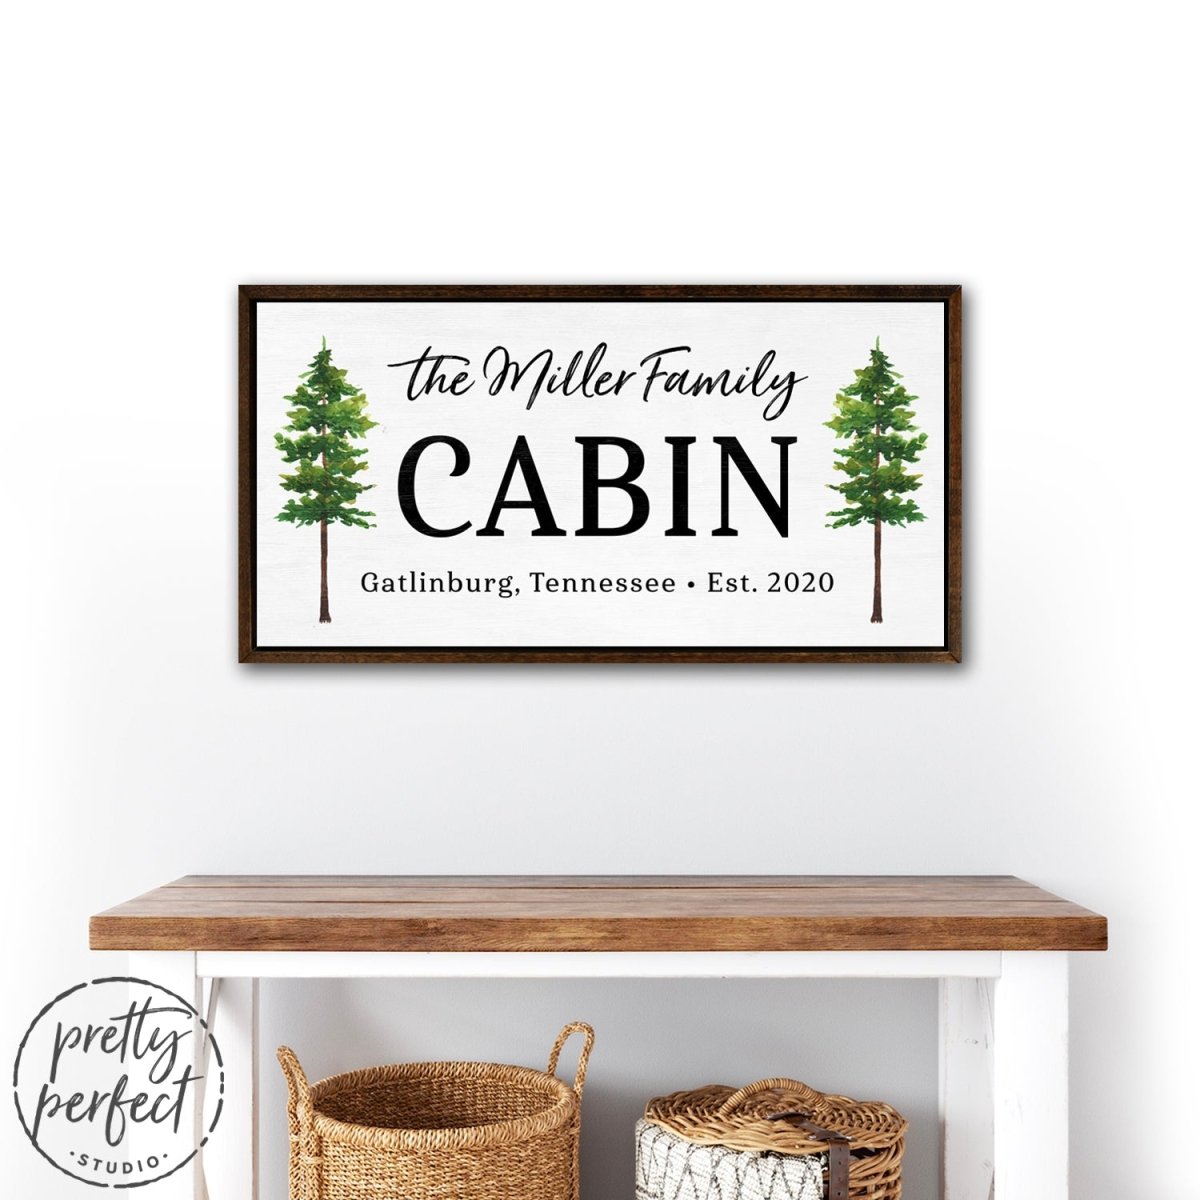 Personalized Family Cabin Sign Hanging in Entryway - Pretty Perfect Studio